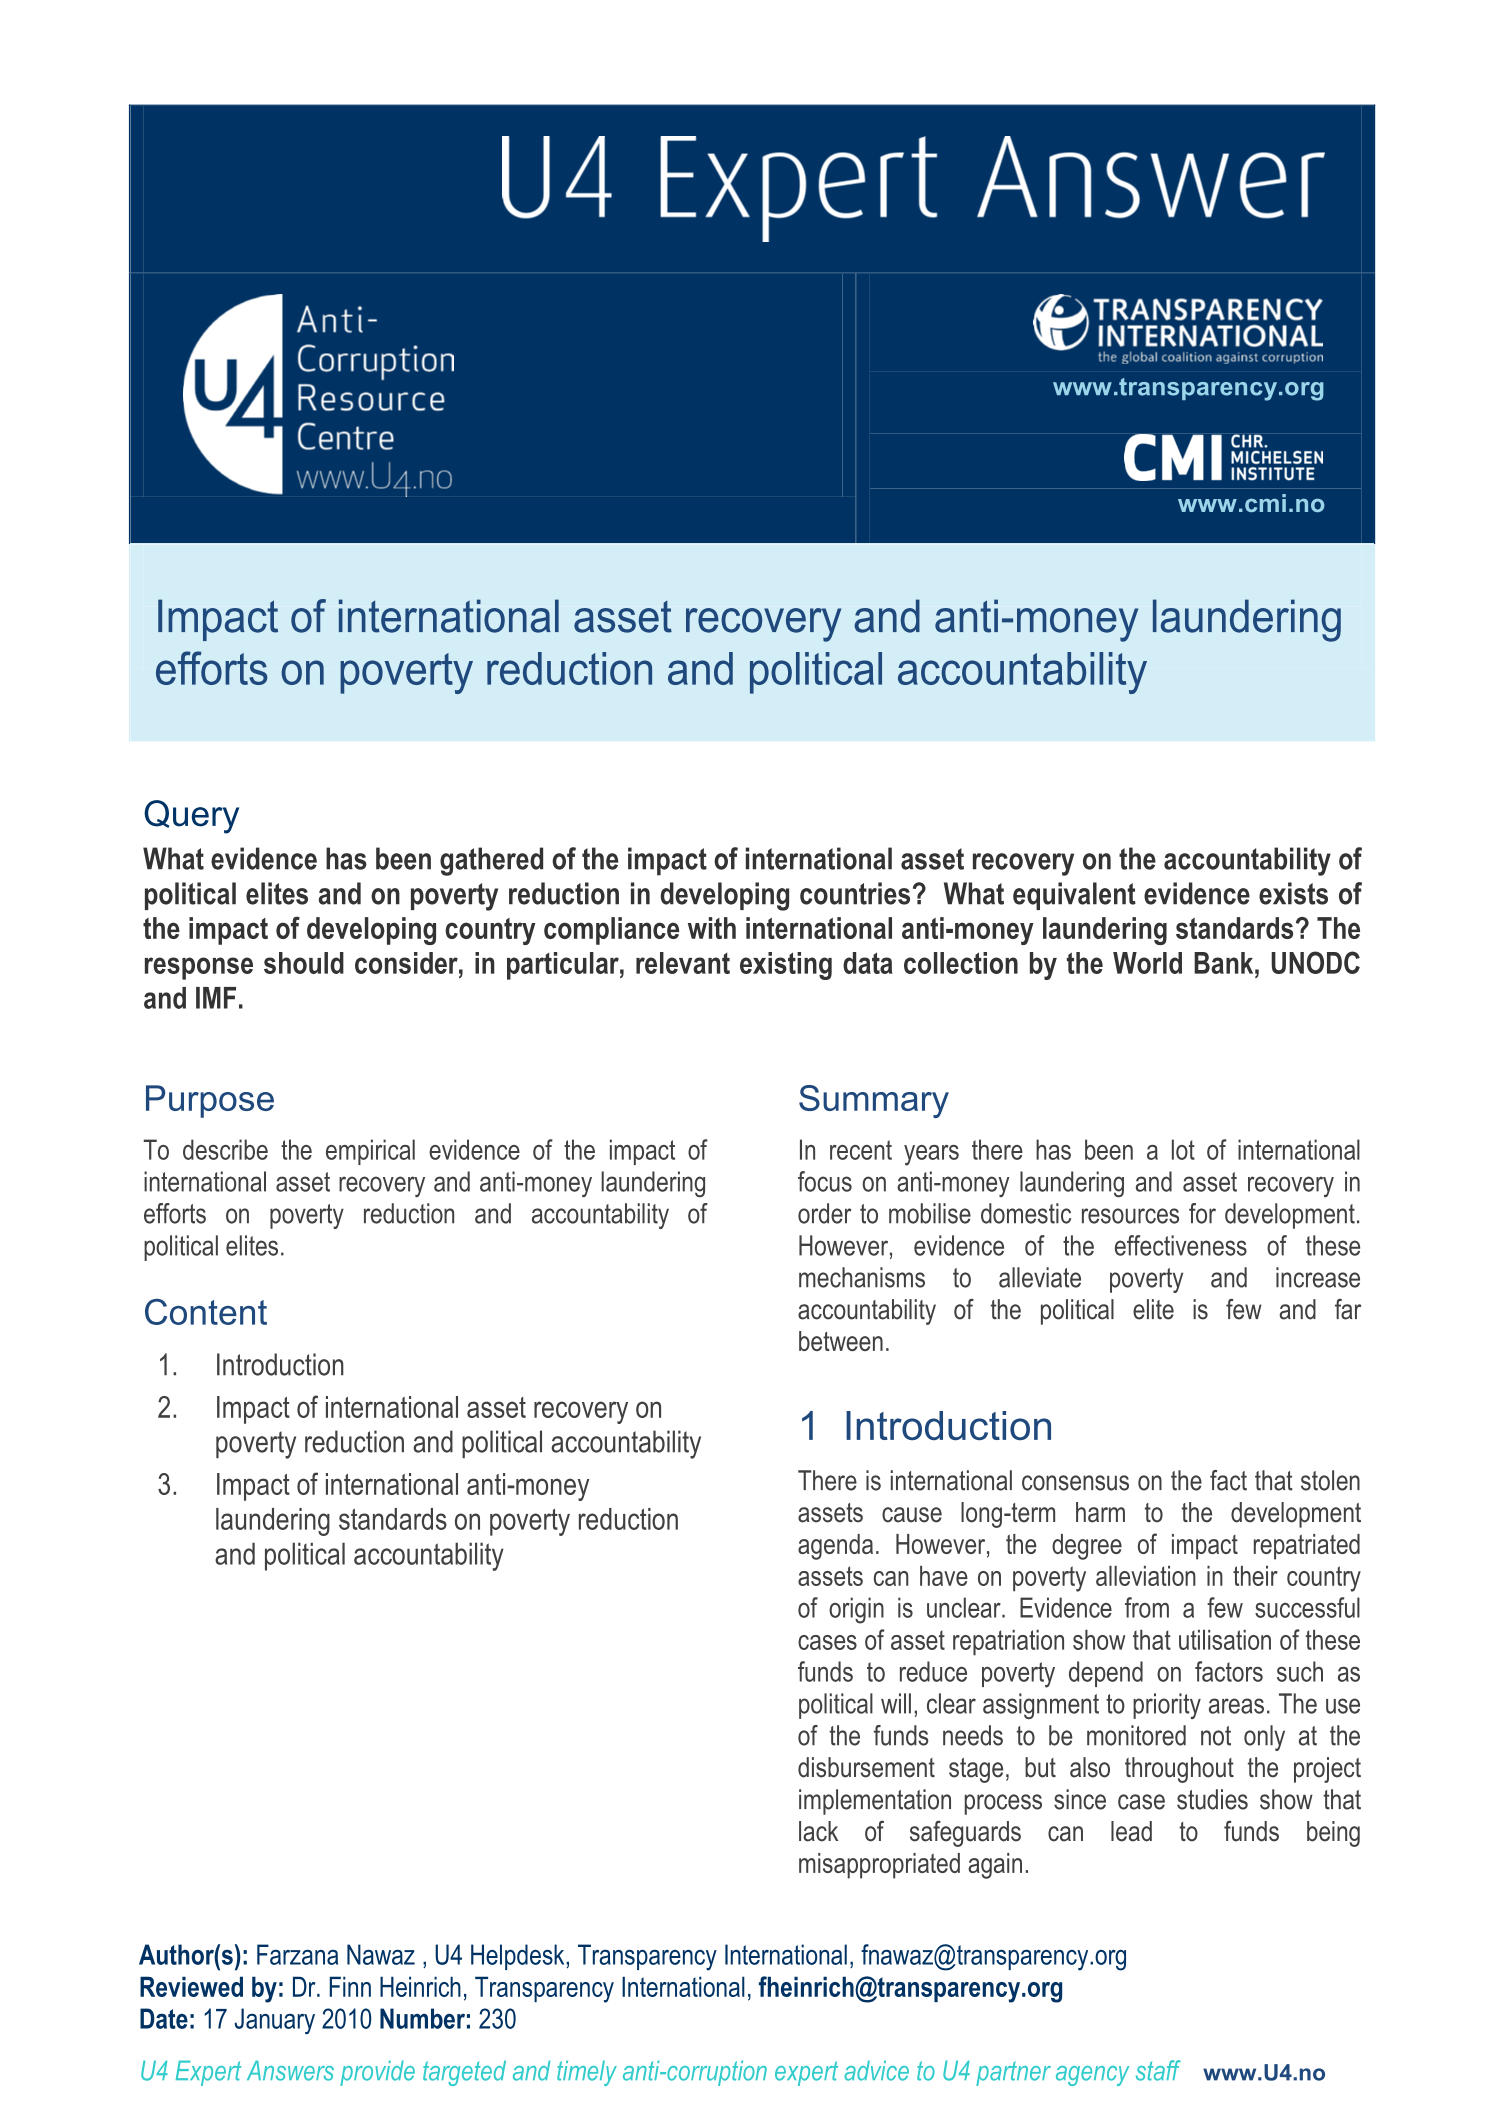 Impact of international asset recovery and anti-money laundering efforts on poverty reduction